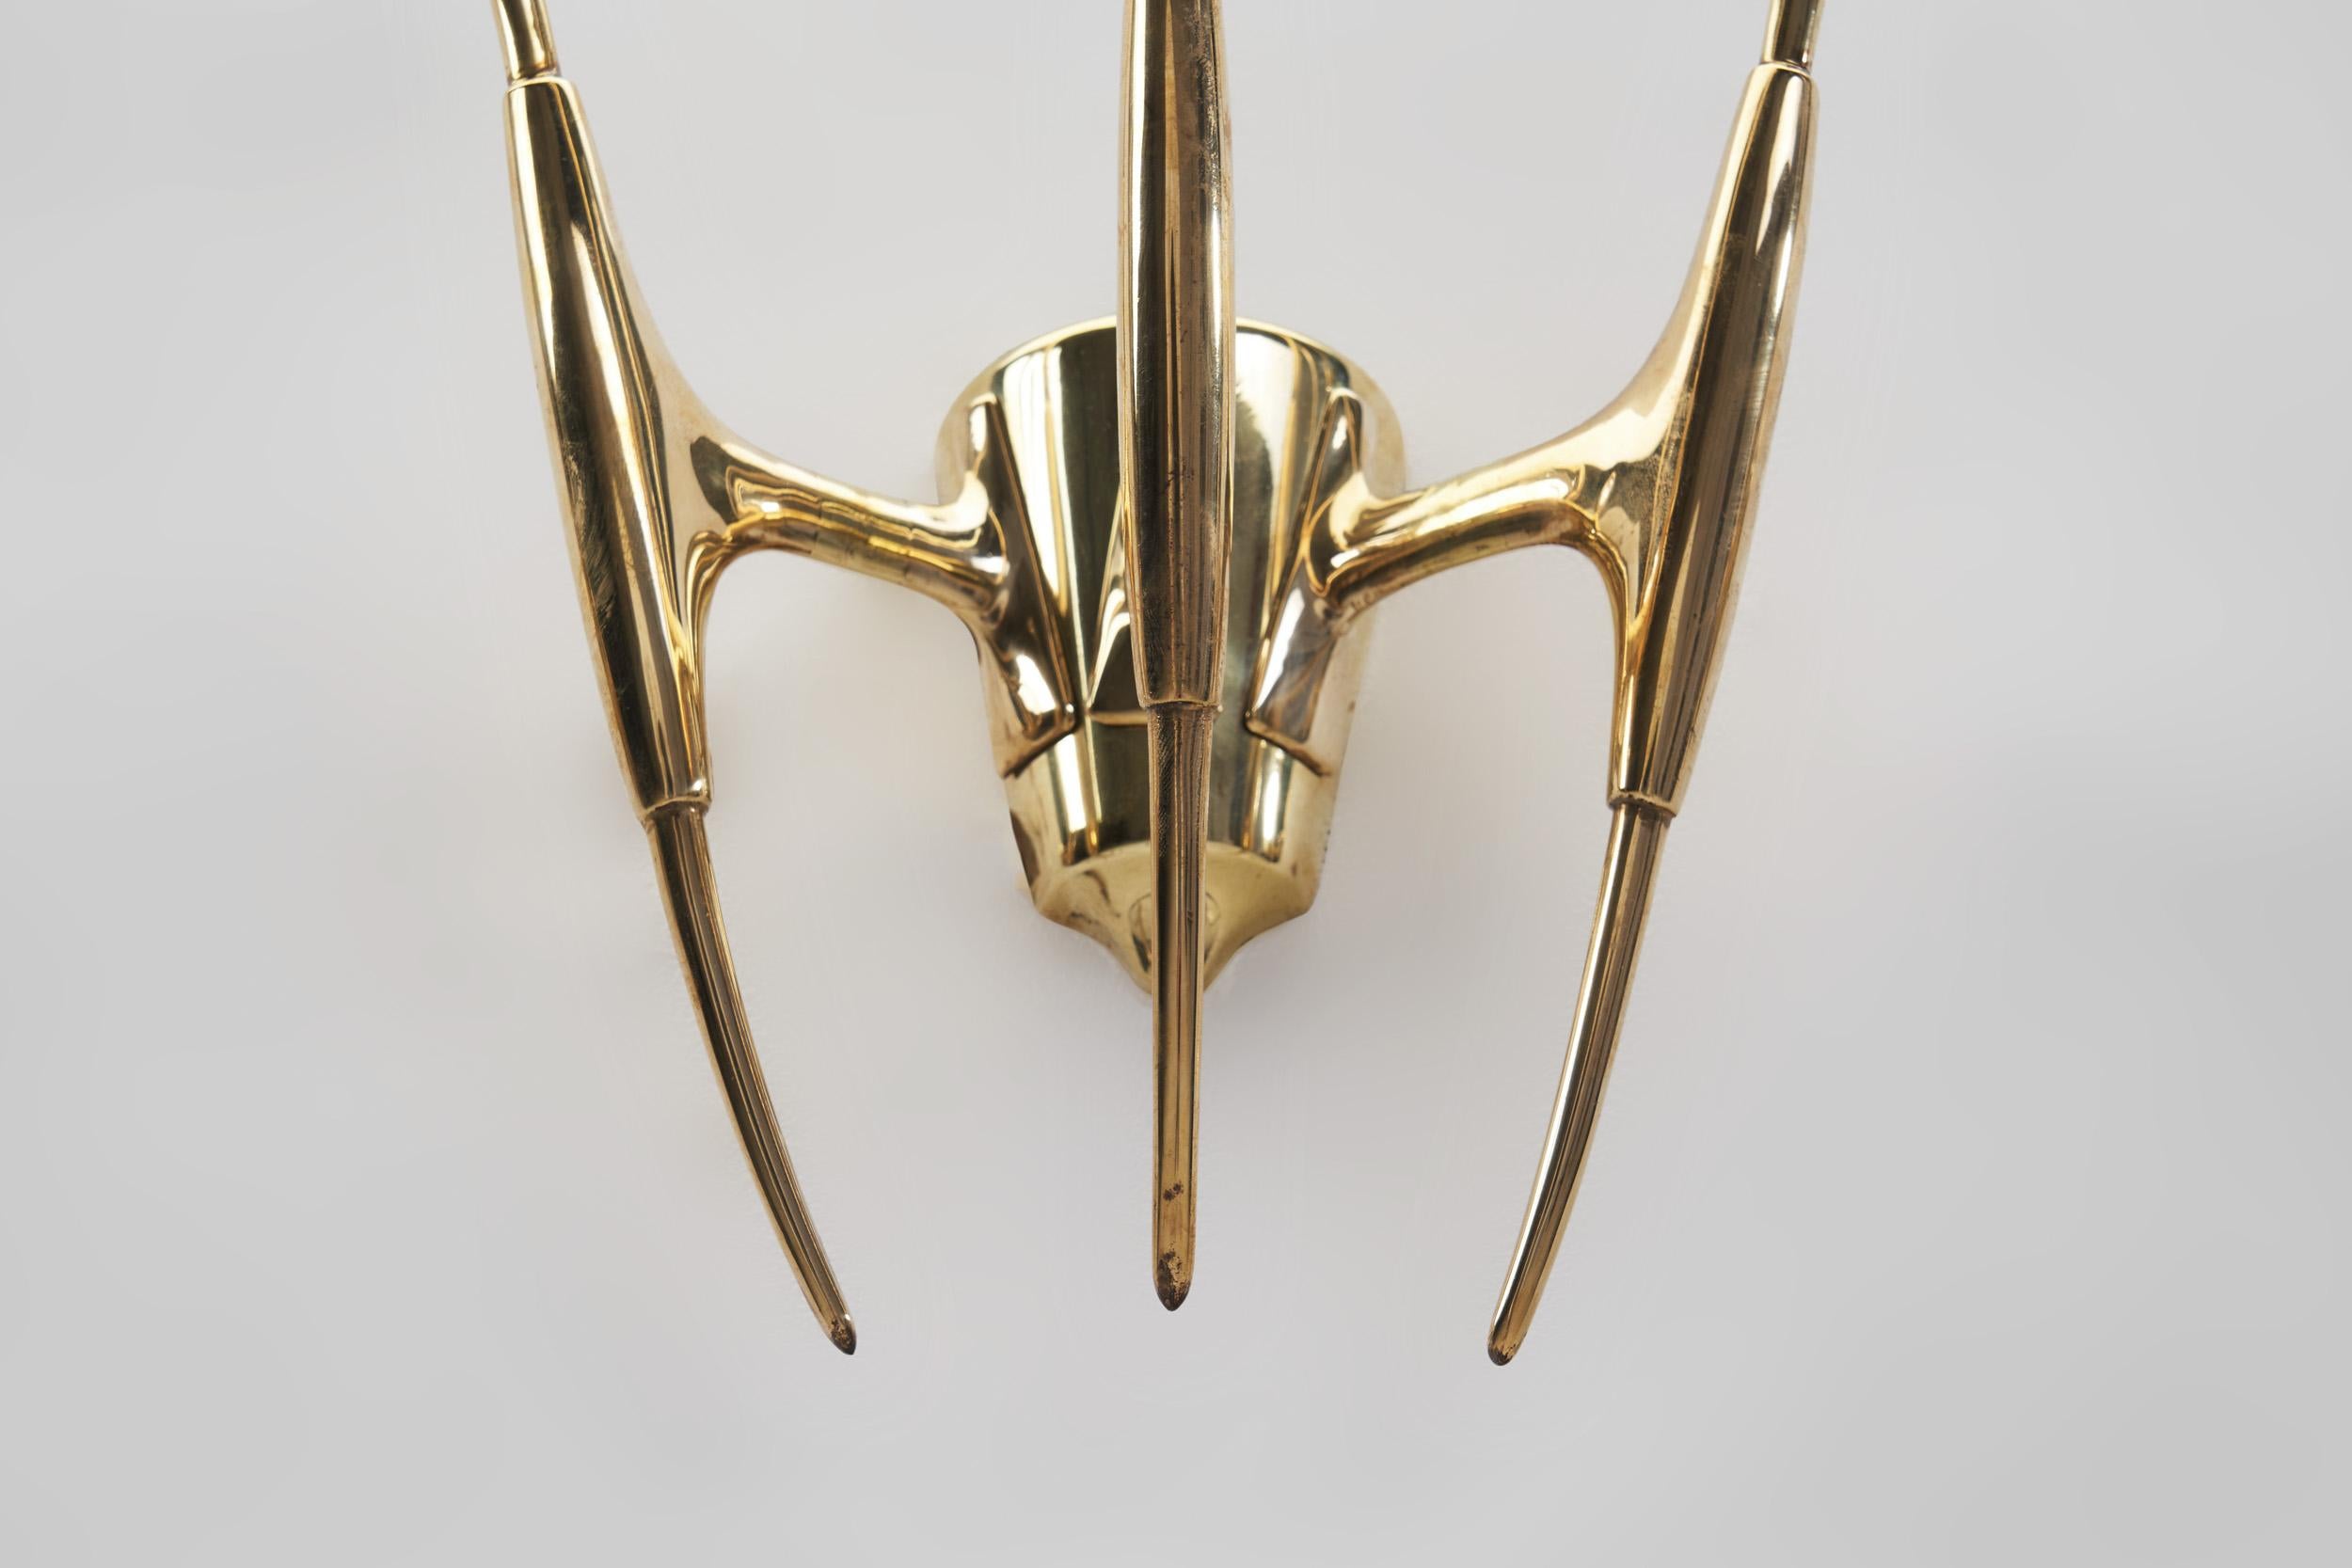 Oscar Torlasco Sculptural Brass Wall Lights for Lumi, Italy, 1950s For Sale 9